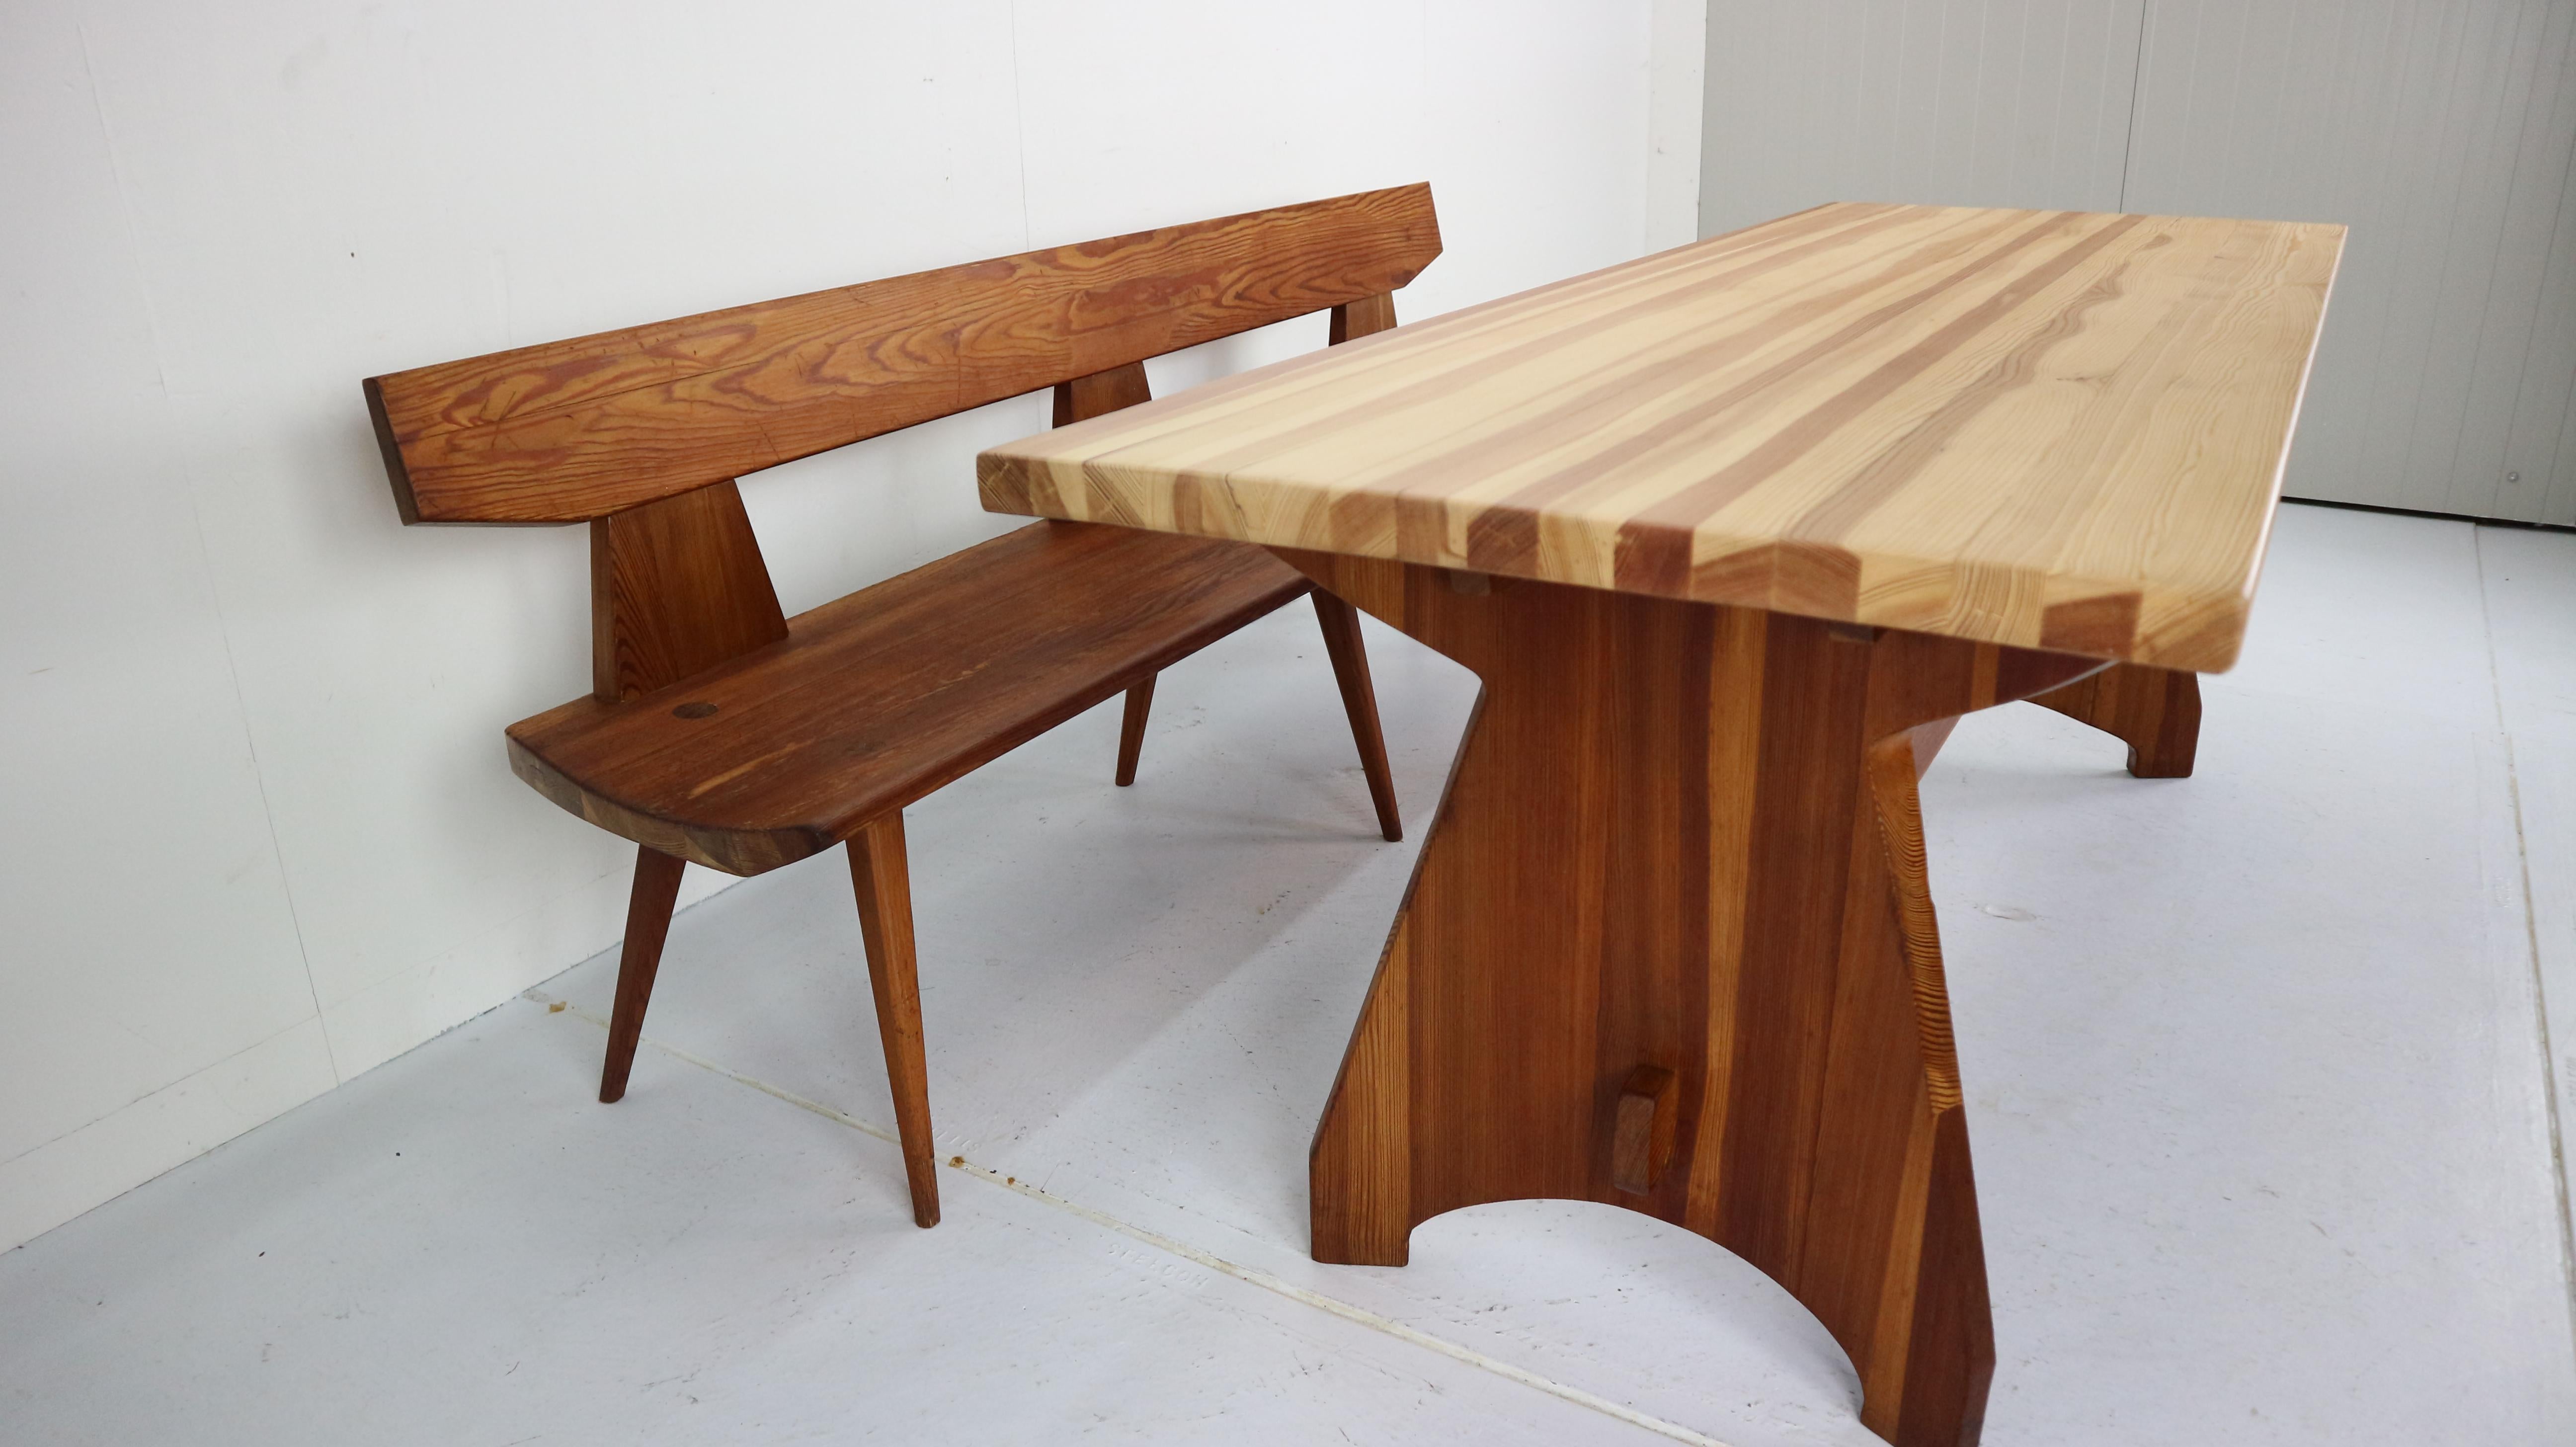 Handcrafted pine wooden bench and matching table by Jacob Kielland Brandt, 1960s for Christiansen, Denmark.
This is a recognizable Scandinavian Modern period piece by its specific shape, elegant curves and construction method. The tabletop is